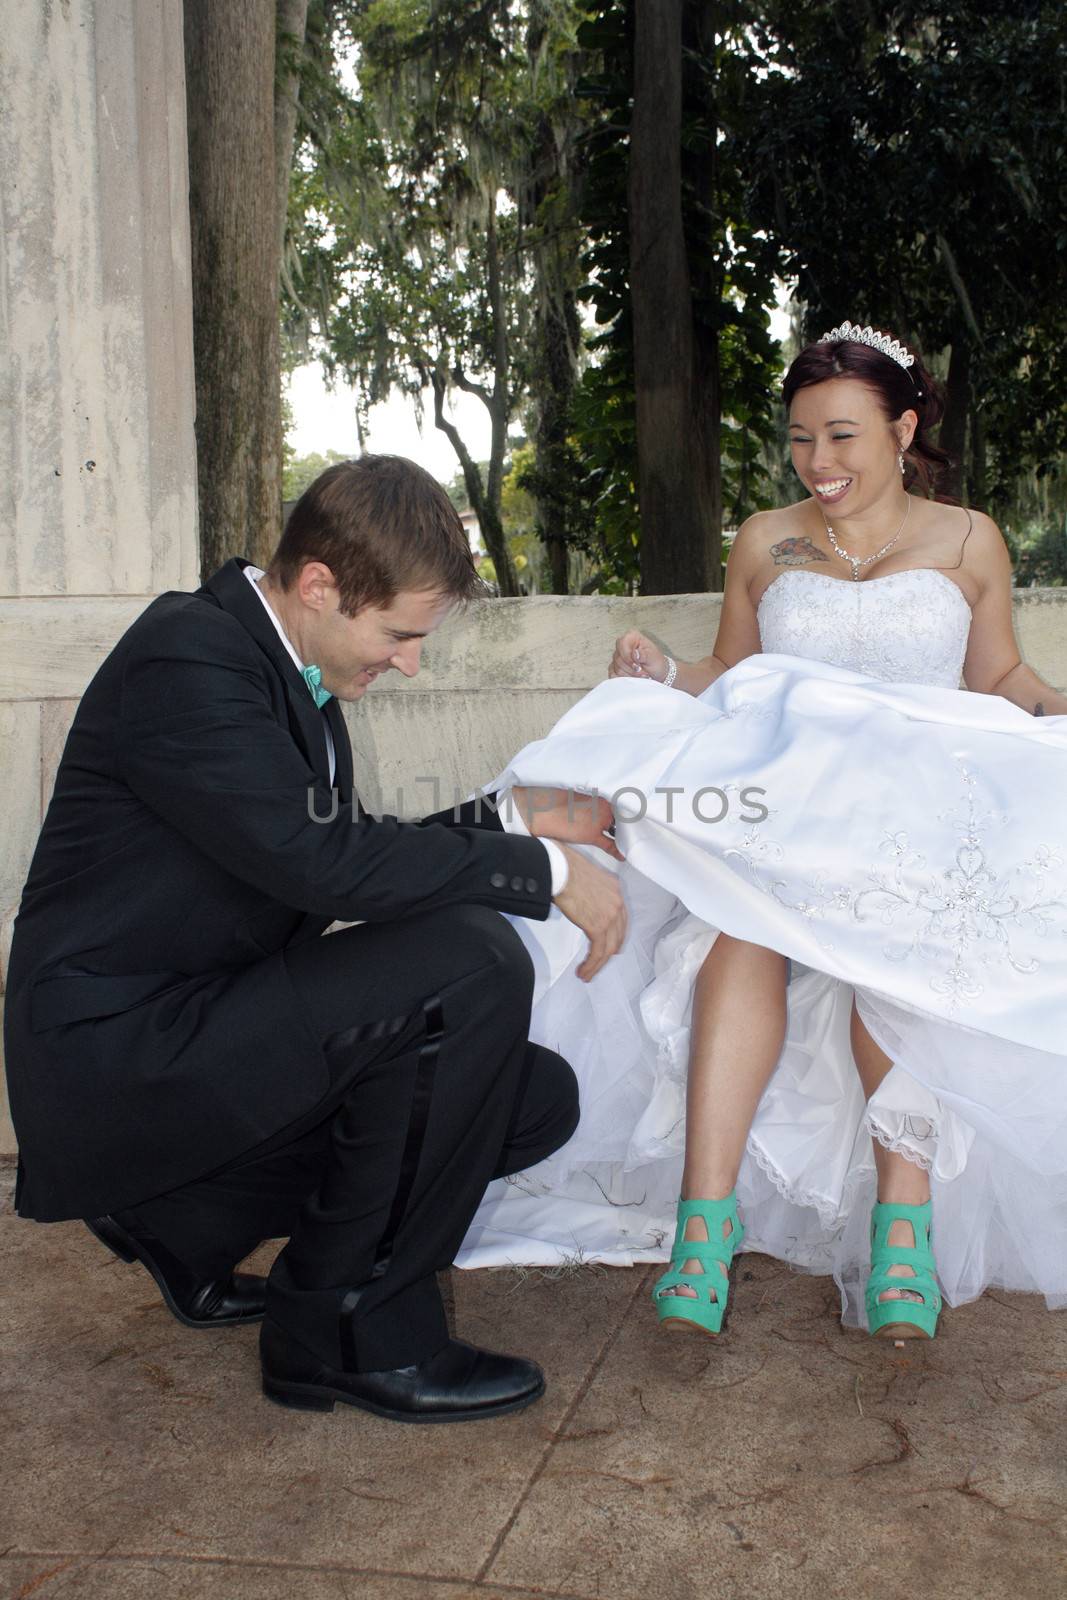 A handsome groom prepares to remove the garter from his bride's leg.